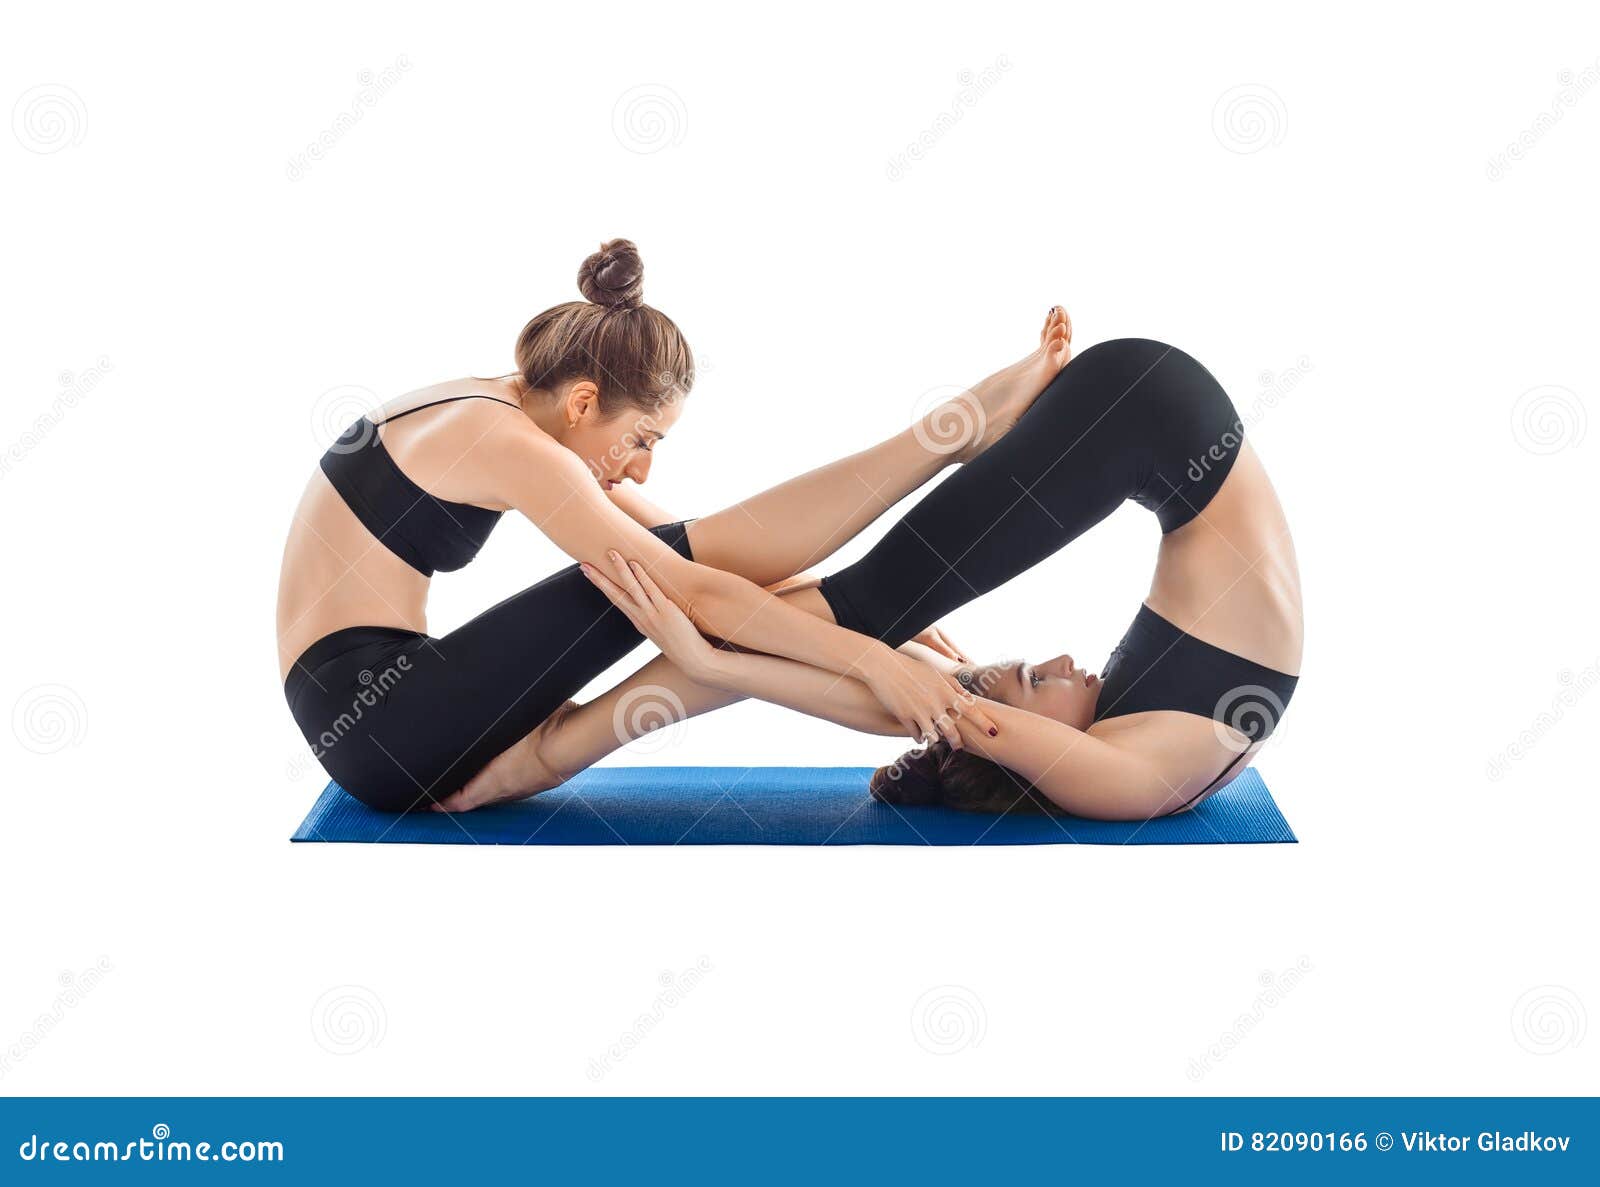 3 997 Partner Yoga Photos Free Royalty Free Stock Photos From Dreamstime